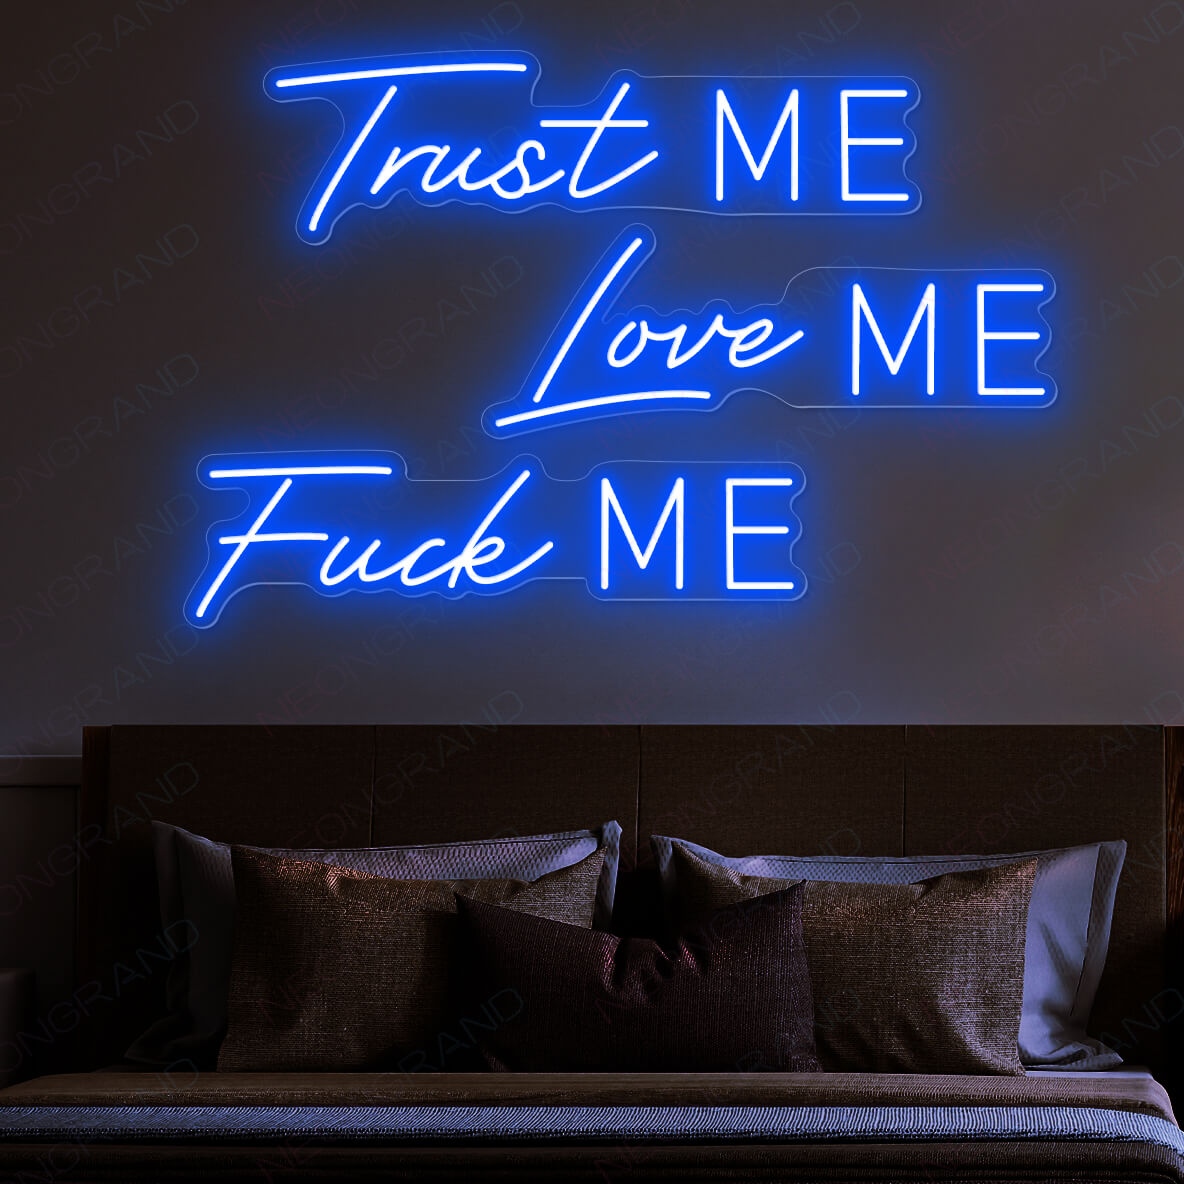 Trust Me Love Me Fuck Me Neon Sign Naughty Party Led Light - NeonGrand